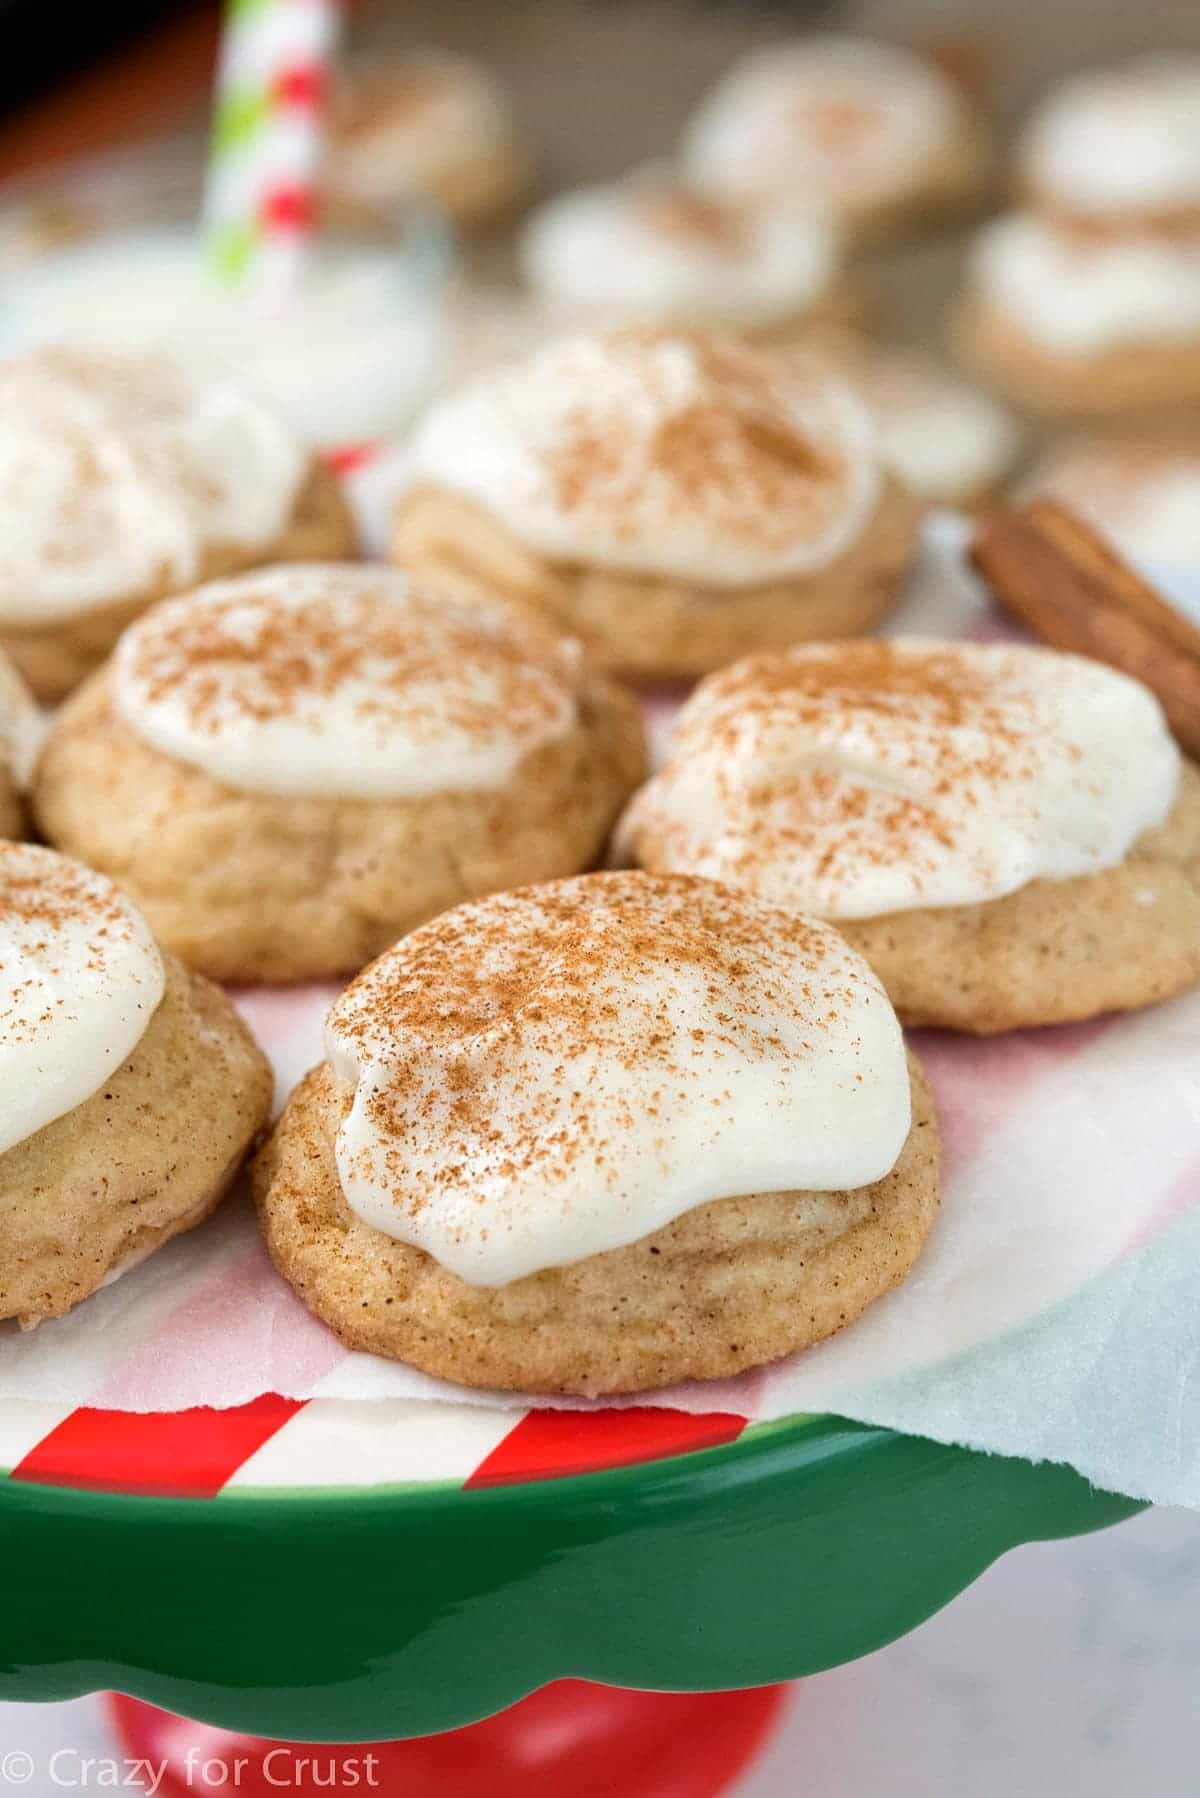 Eggnog-Frosted-Snickerdoodles (1 of 8)e